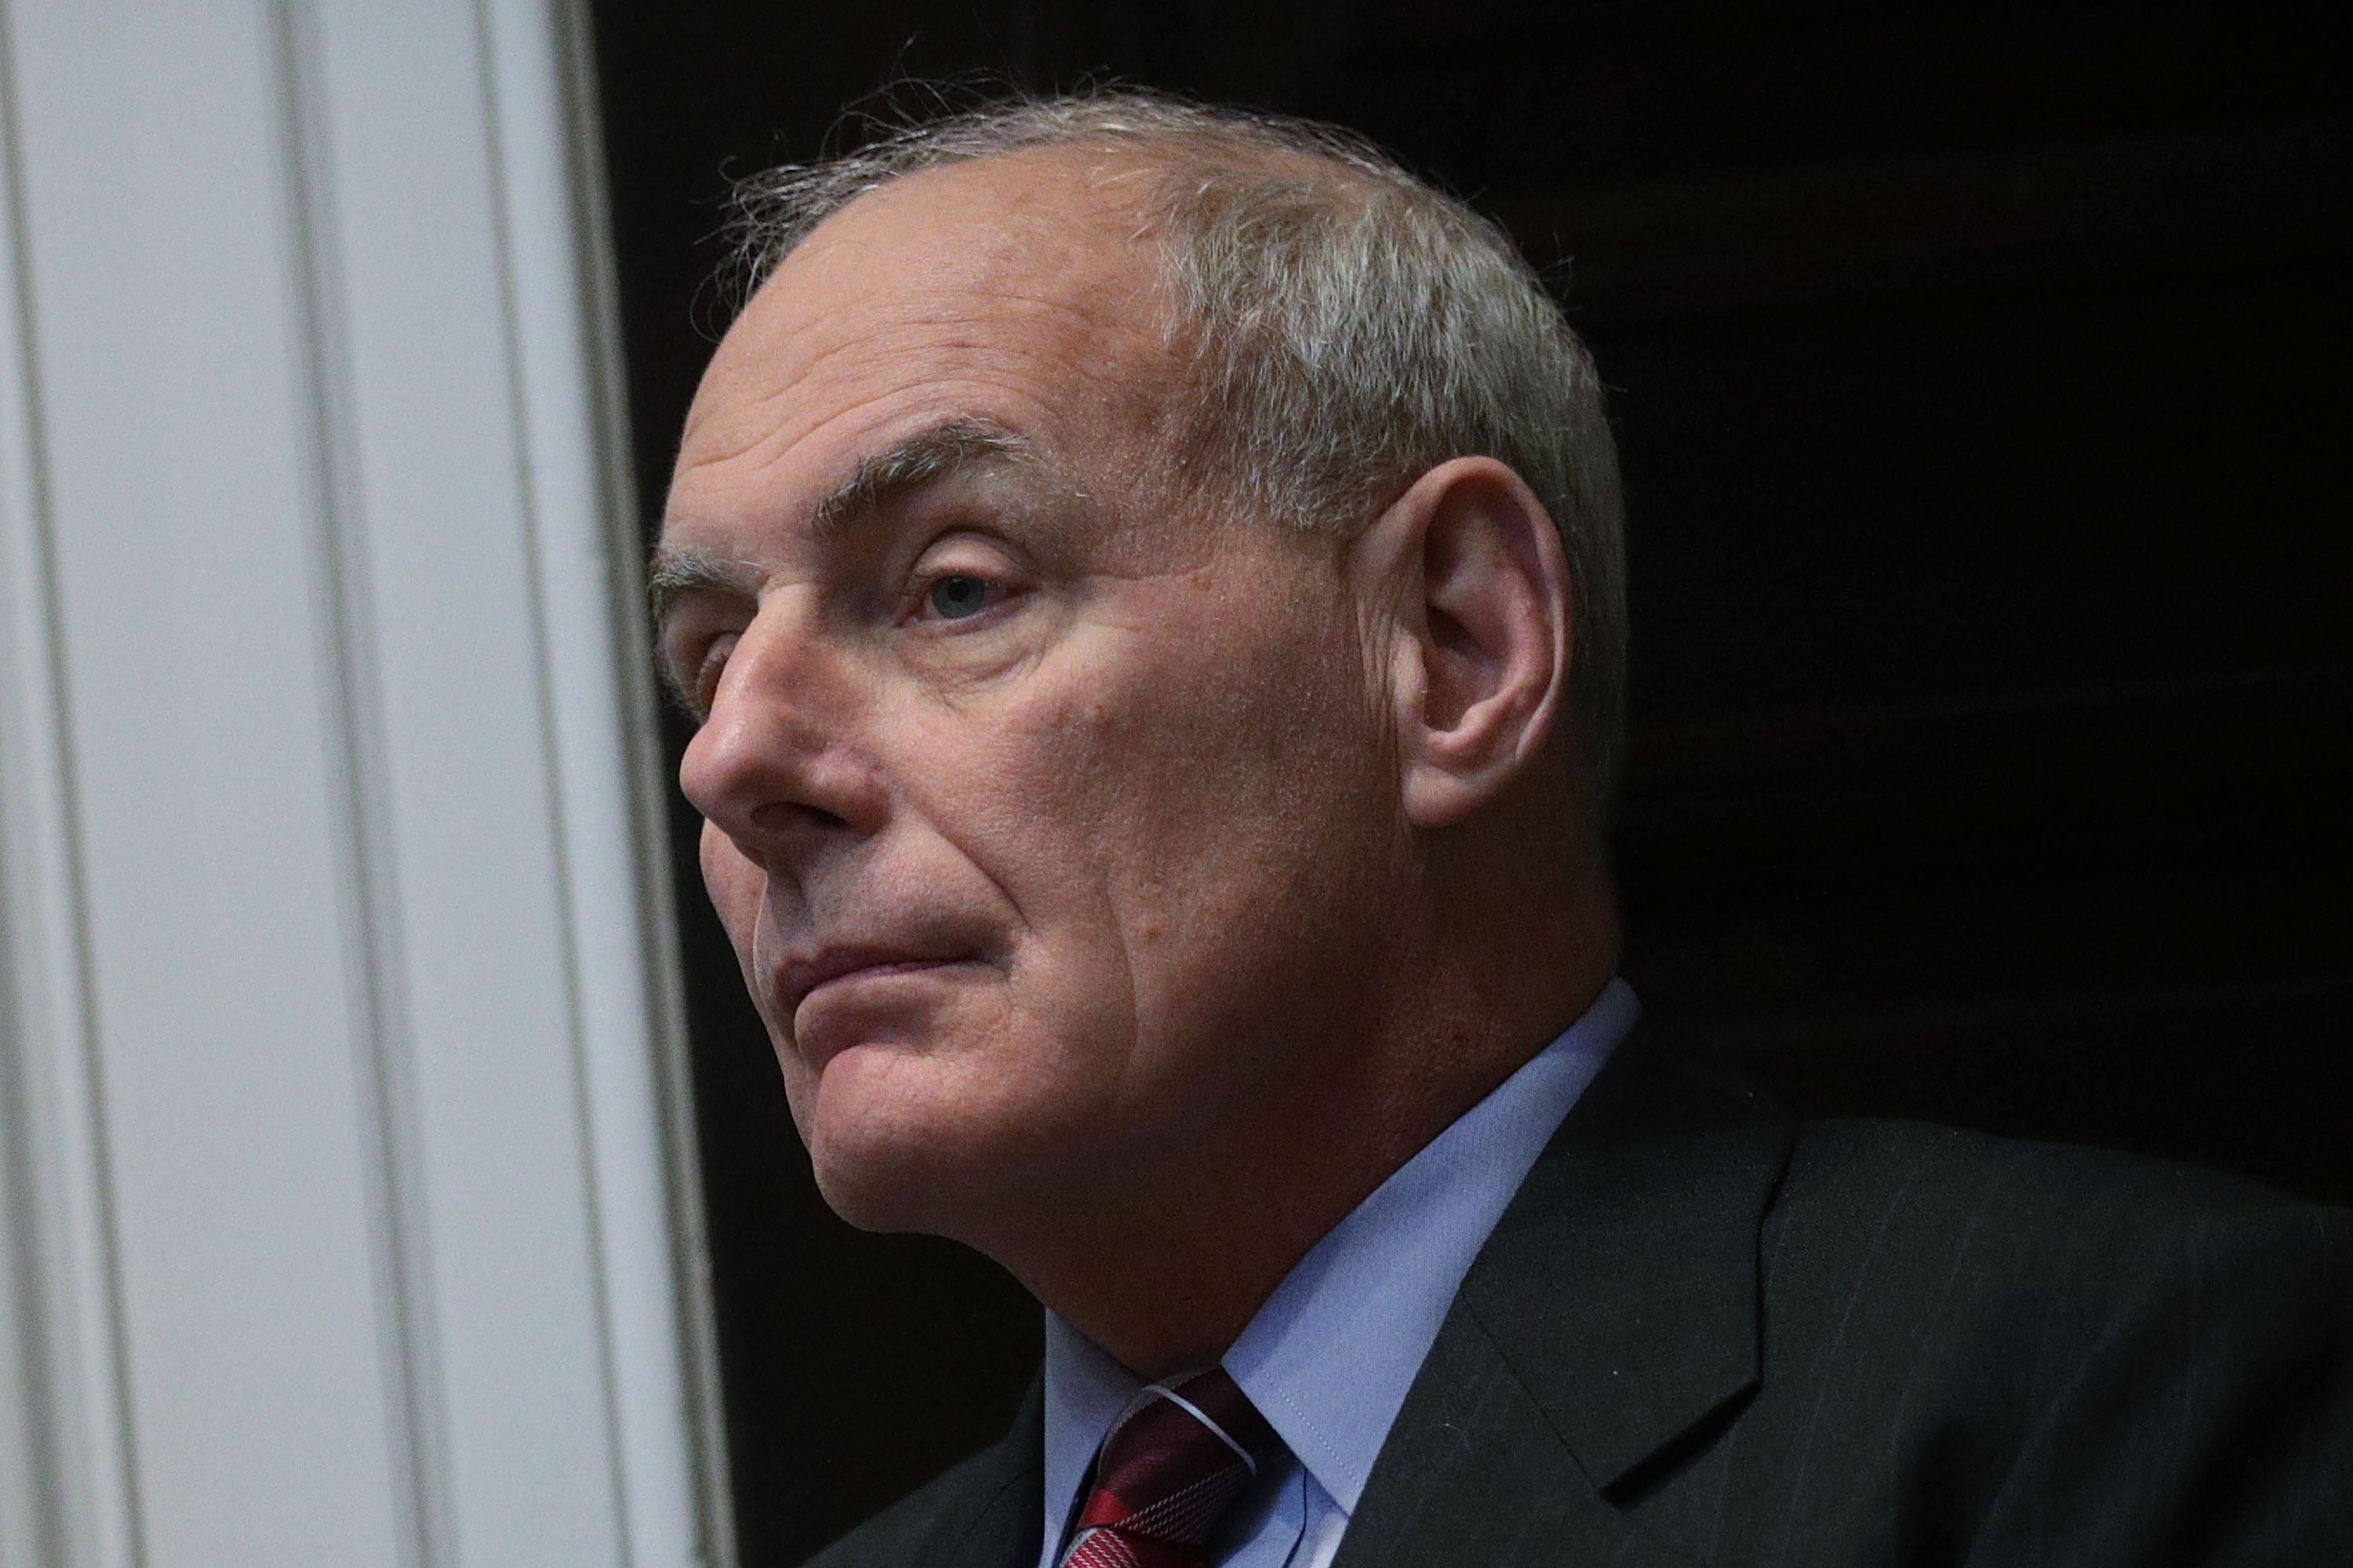 It's Not That John Kelly Needs A History Lesson - He's Just Willfully Choosing To Downplay Slavery
